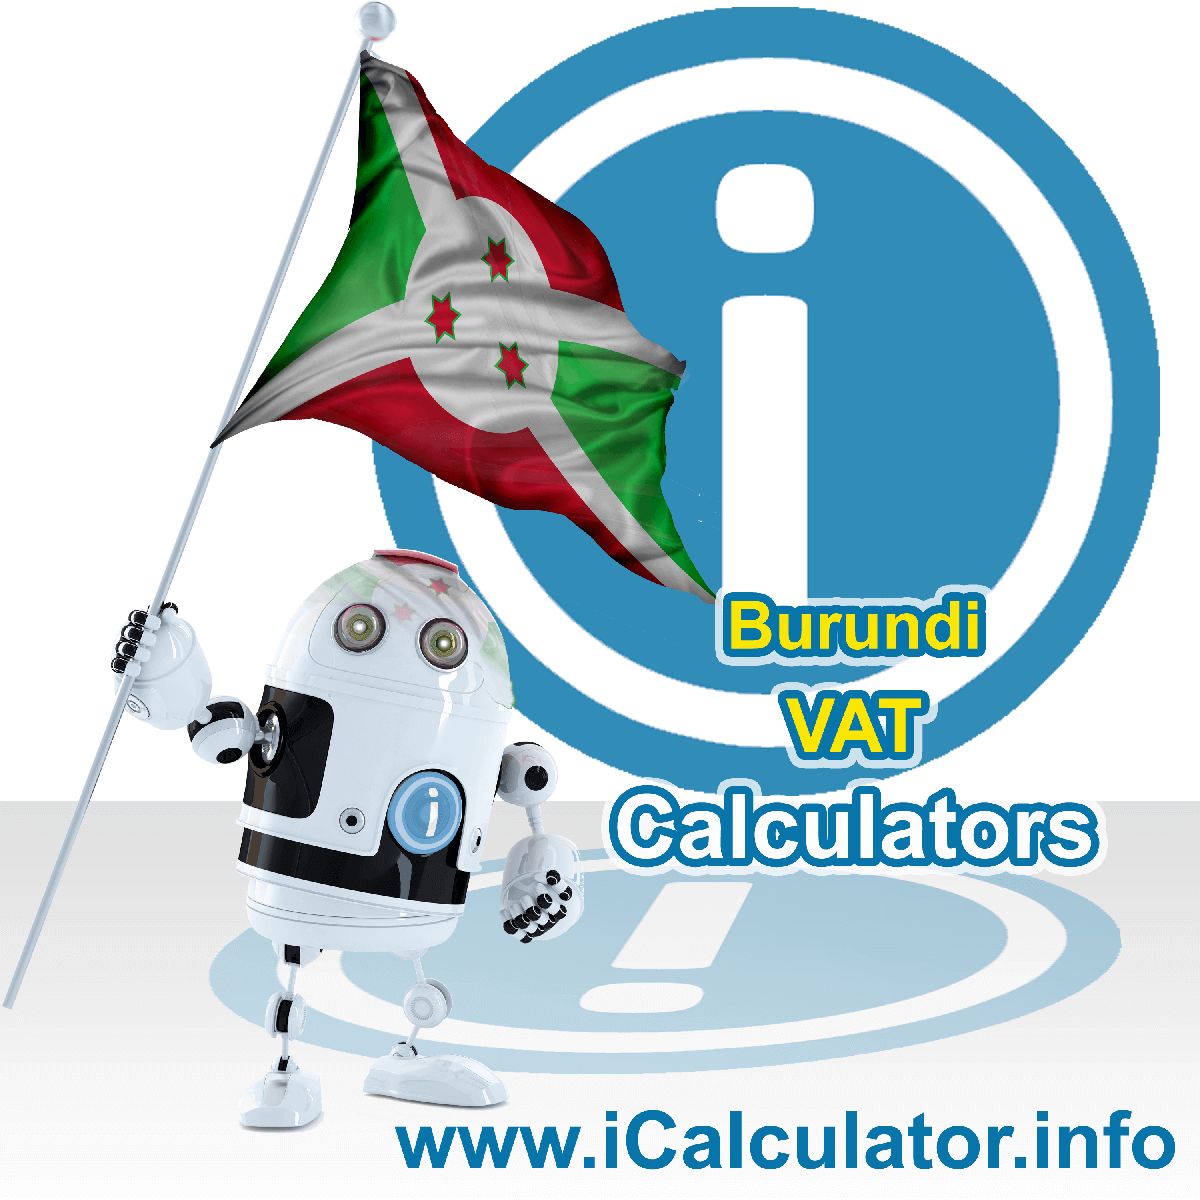 Burundi VAT Calculator. This image shows the Burundi flag and information relating to the VAT formula used for calculating Value Added Tax in Burundi using the Burundi VAT Calculator in 2023